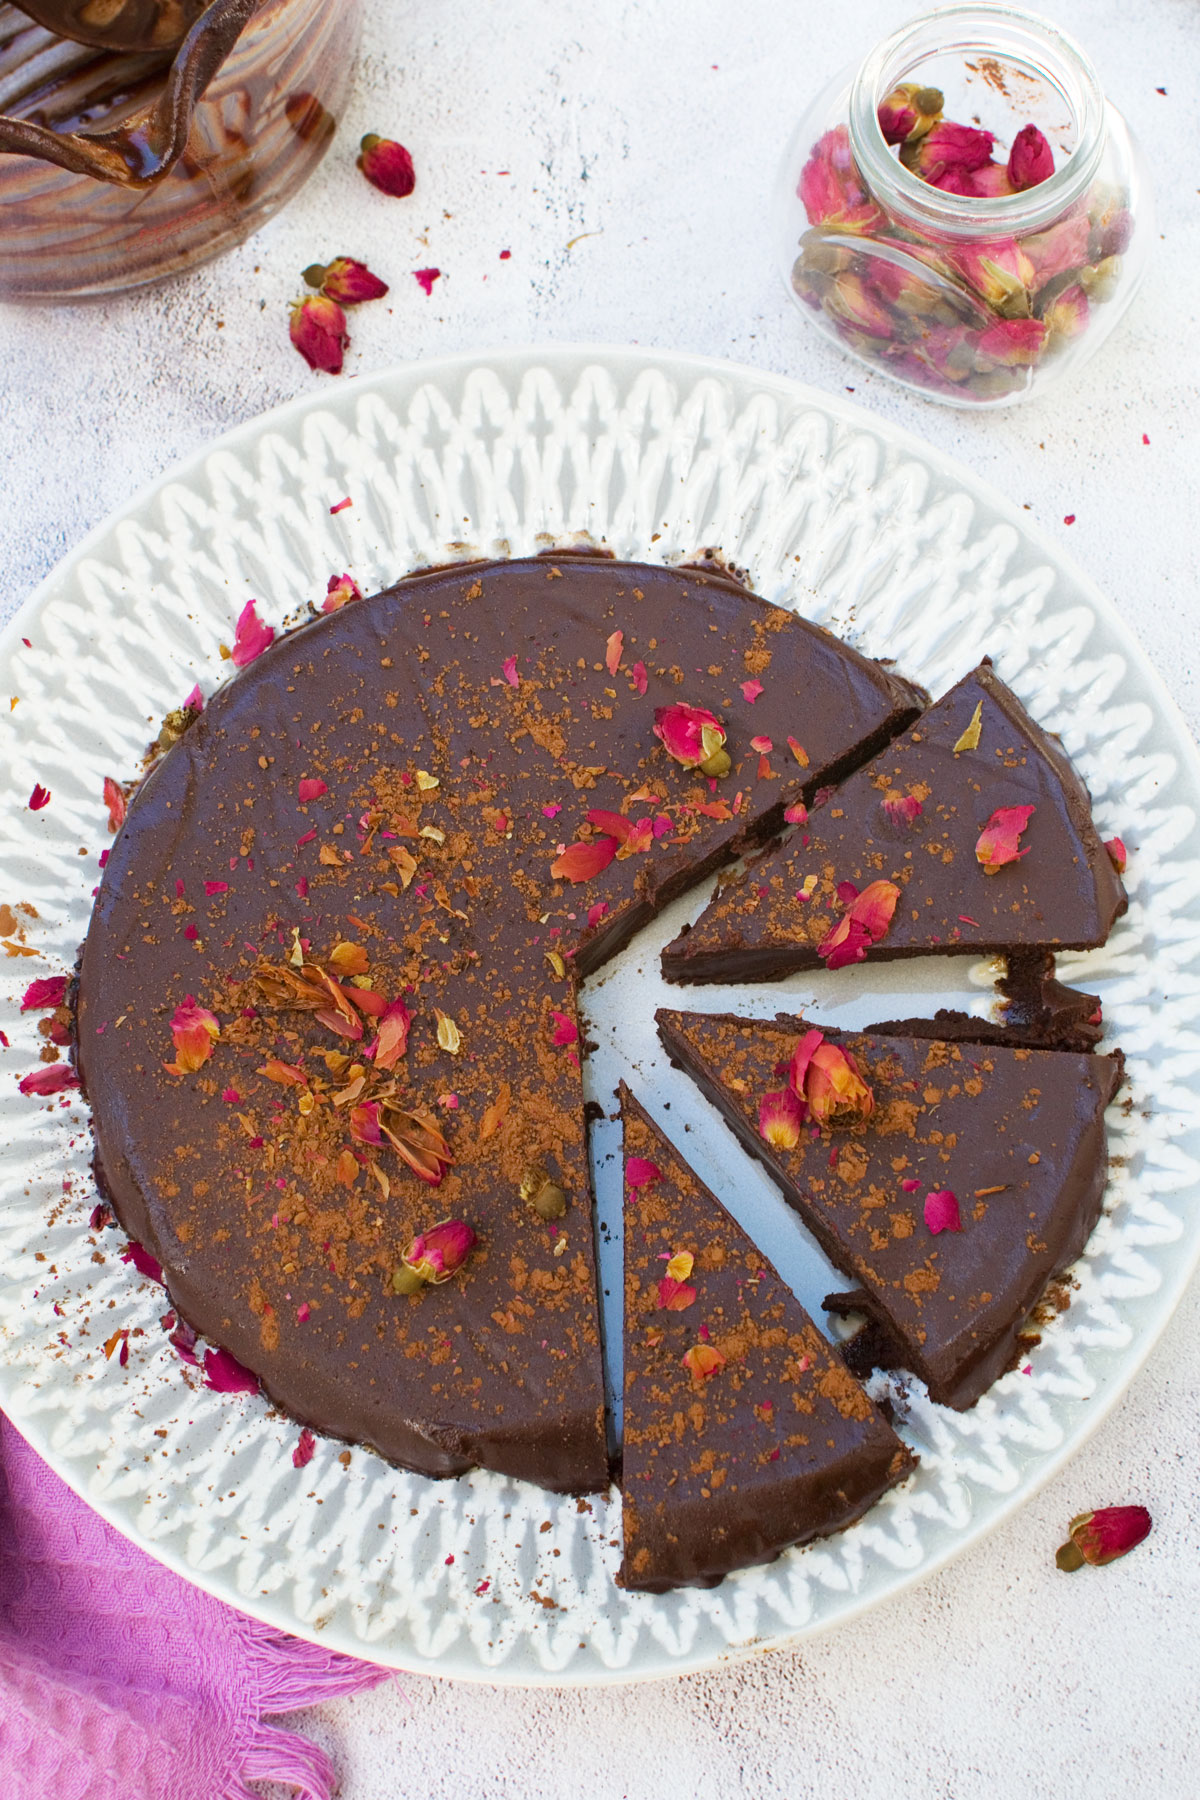 A no bake chocolate truffle cake on a grey patterned plate sliced and decorated with rose buds